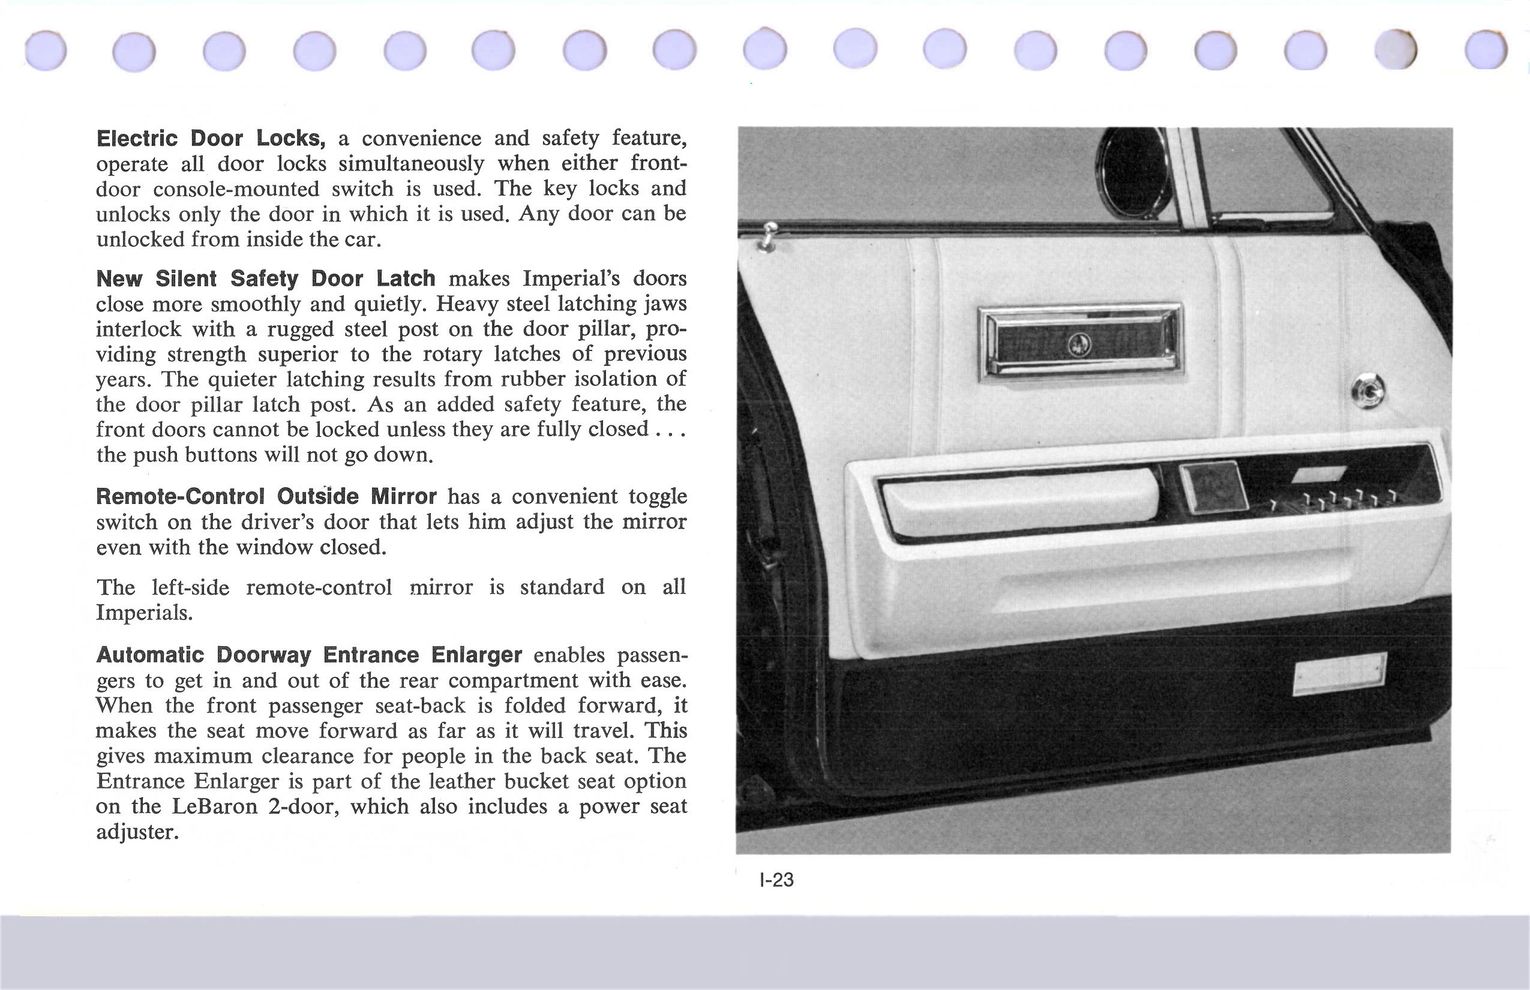 1969 Chrysler Data Book Page 176